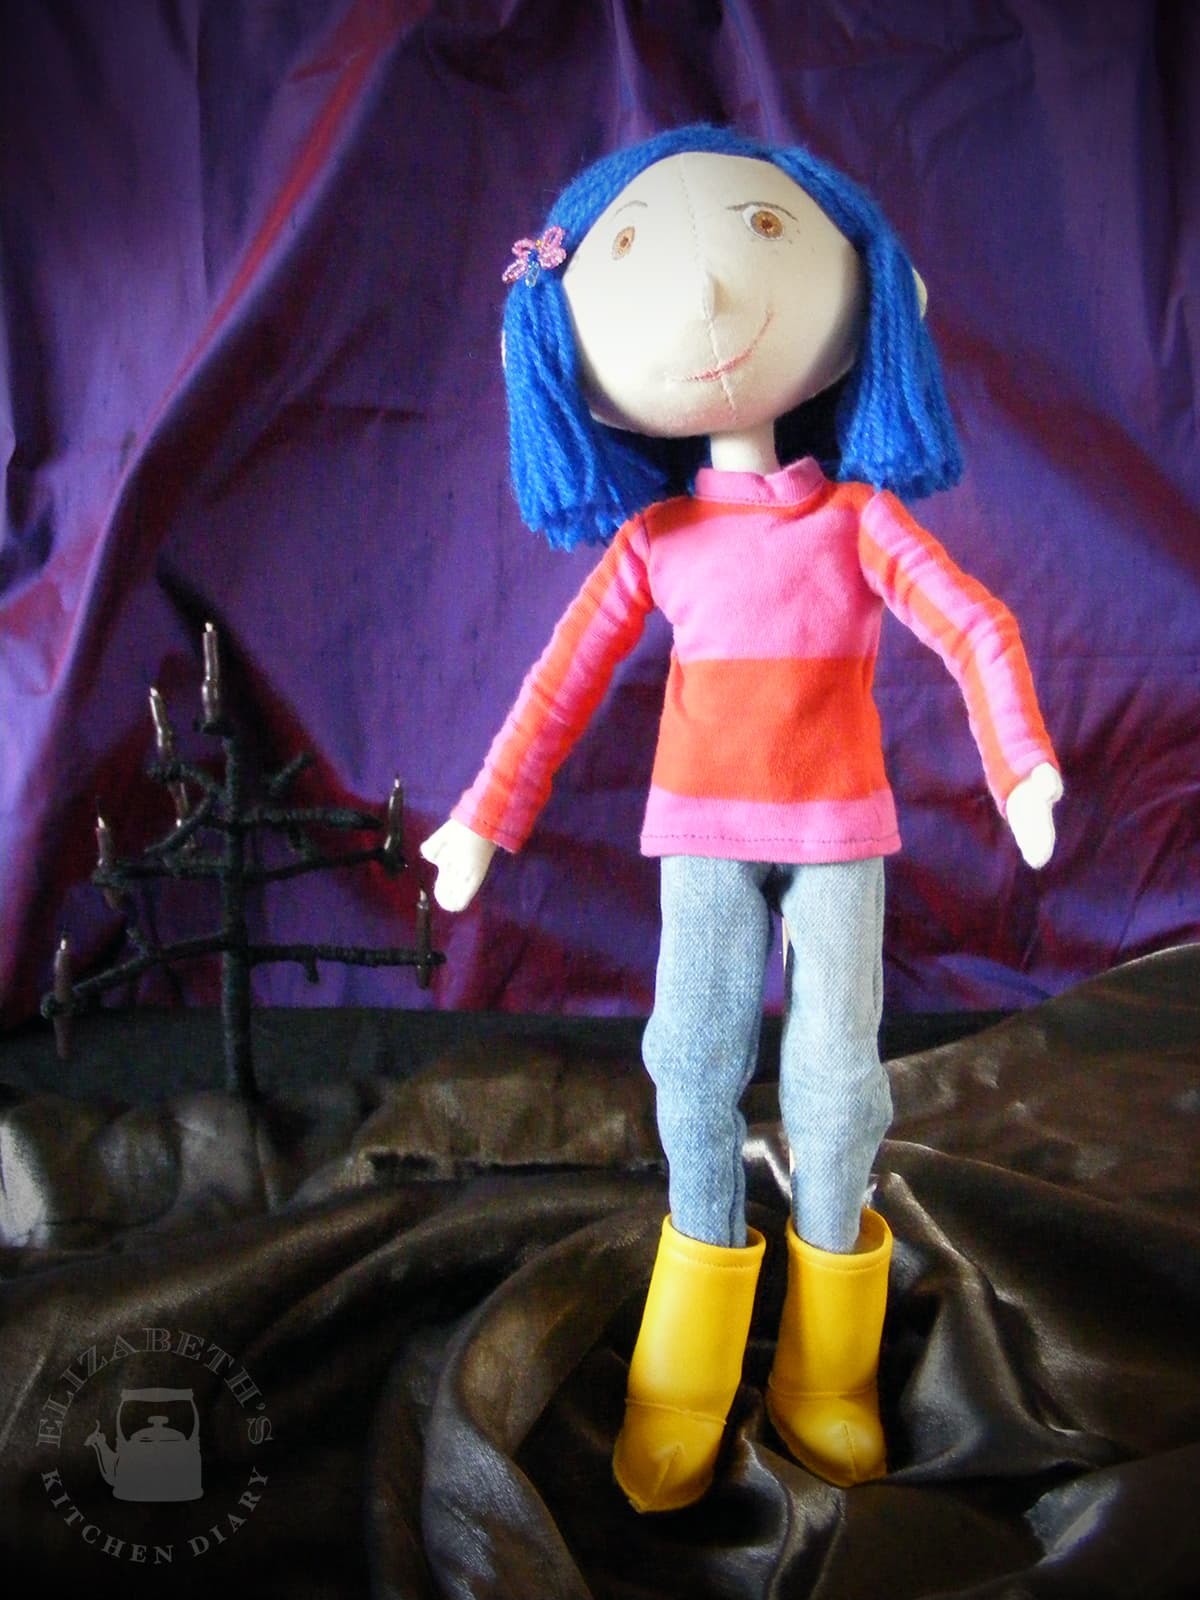 Image of a handmade Coraline doll standing up wearing a long sleeved shirt and blue jeans.